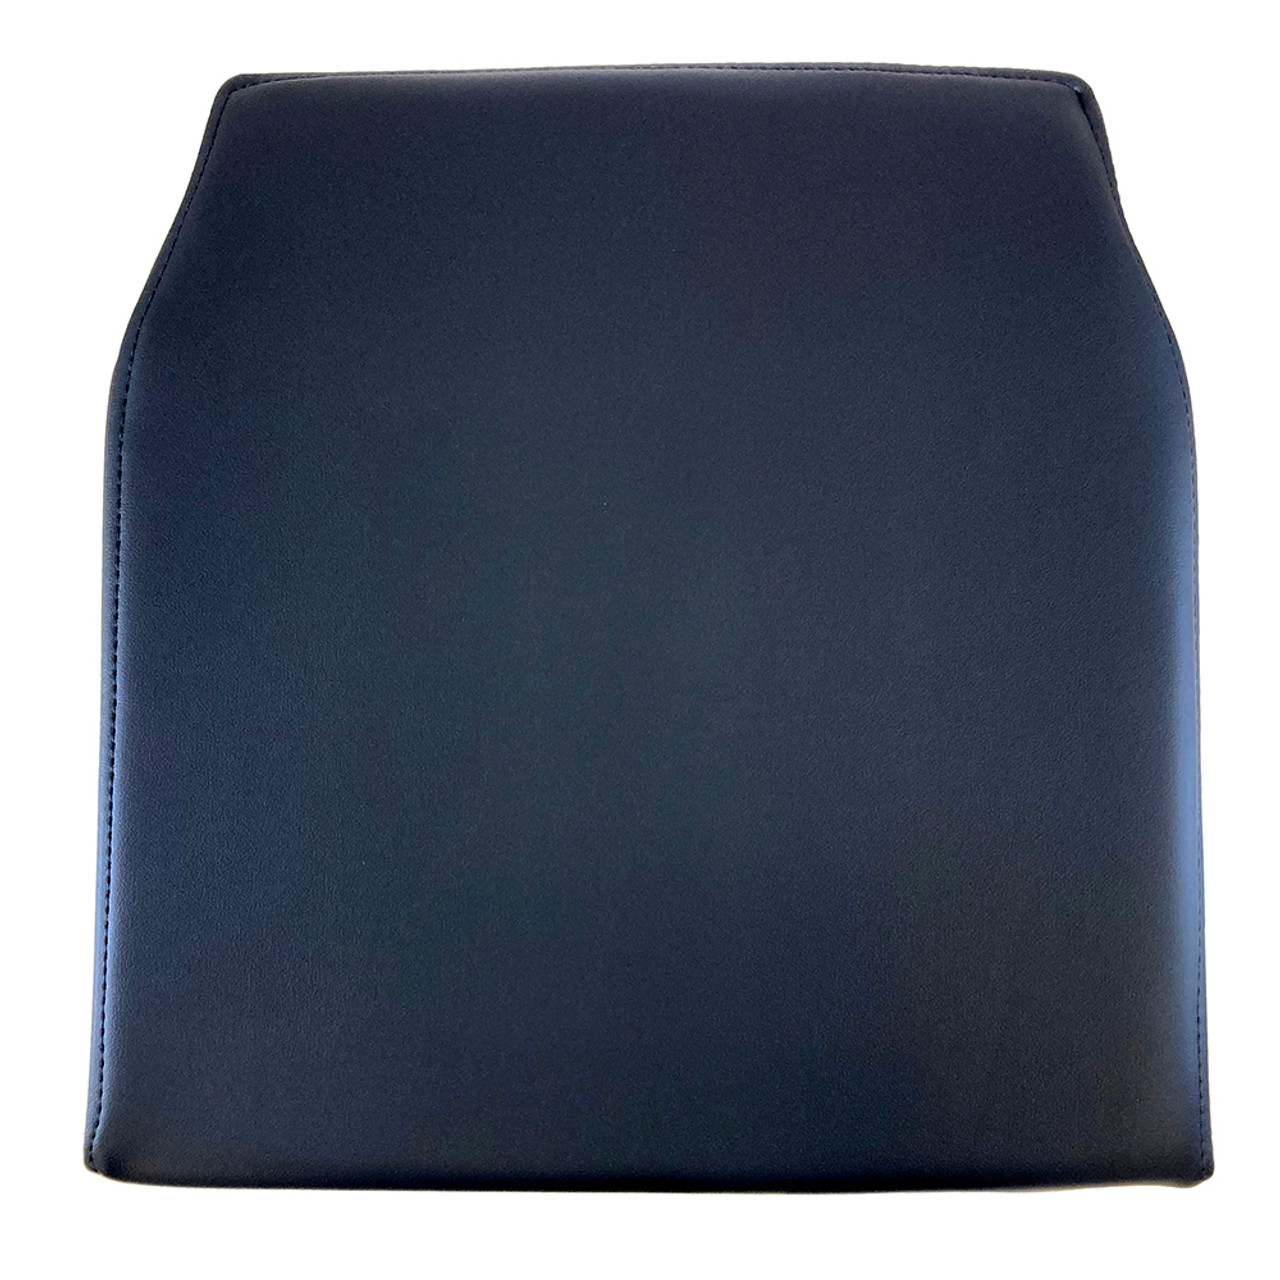 Aircraft Seat Cushions and Covers